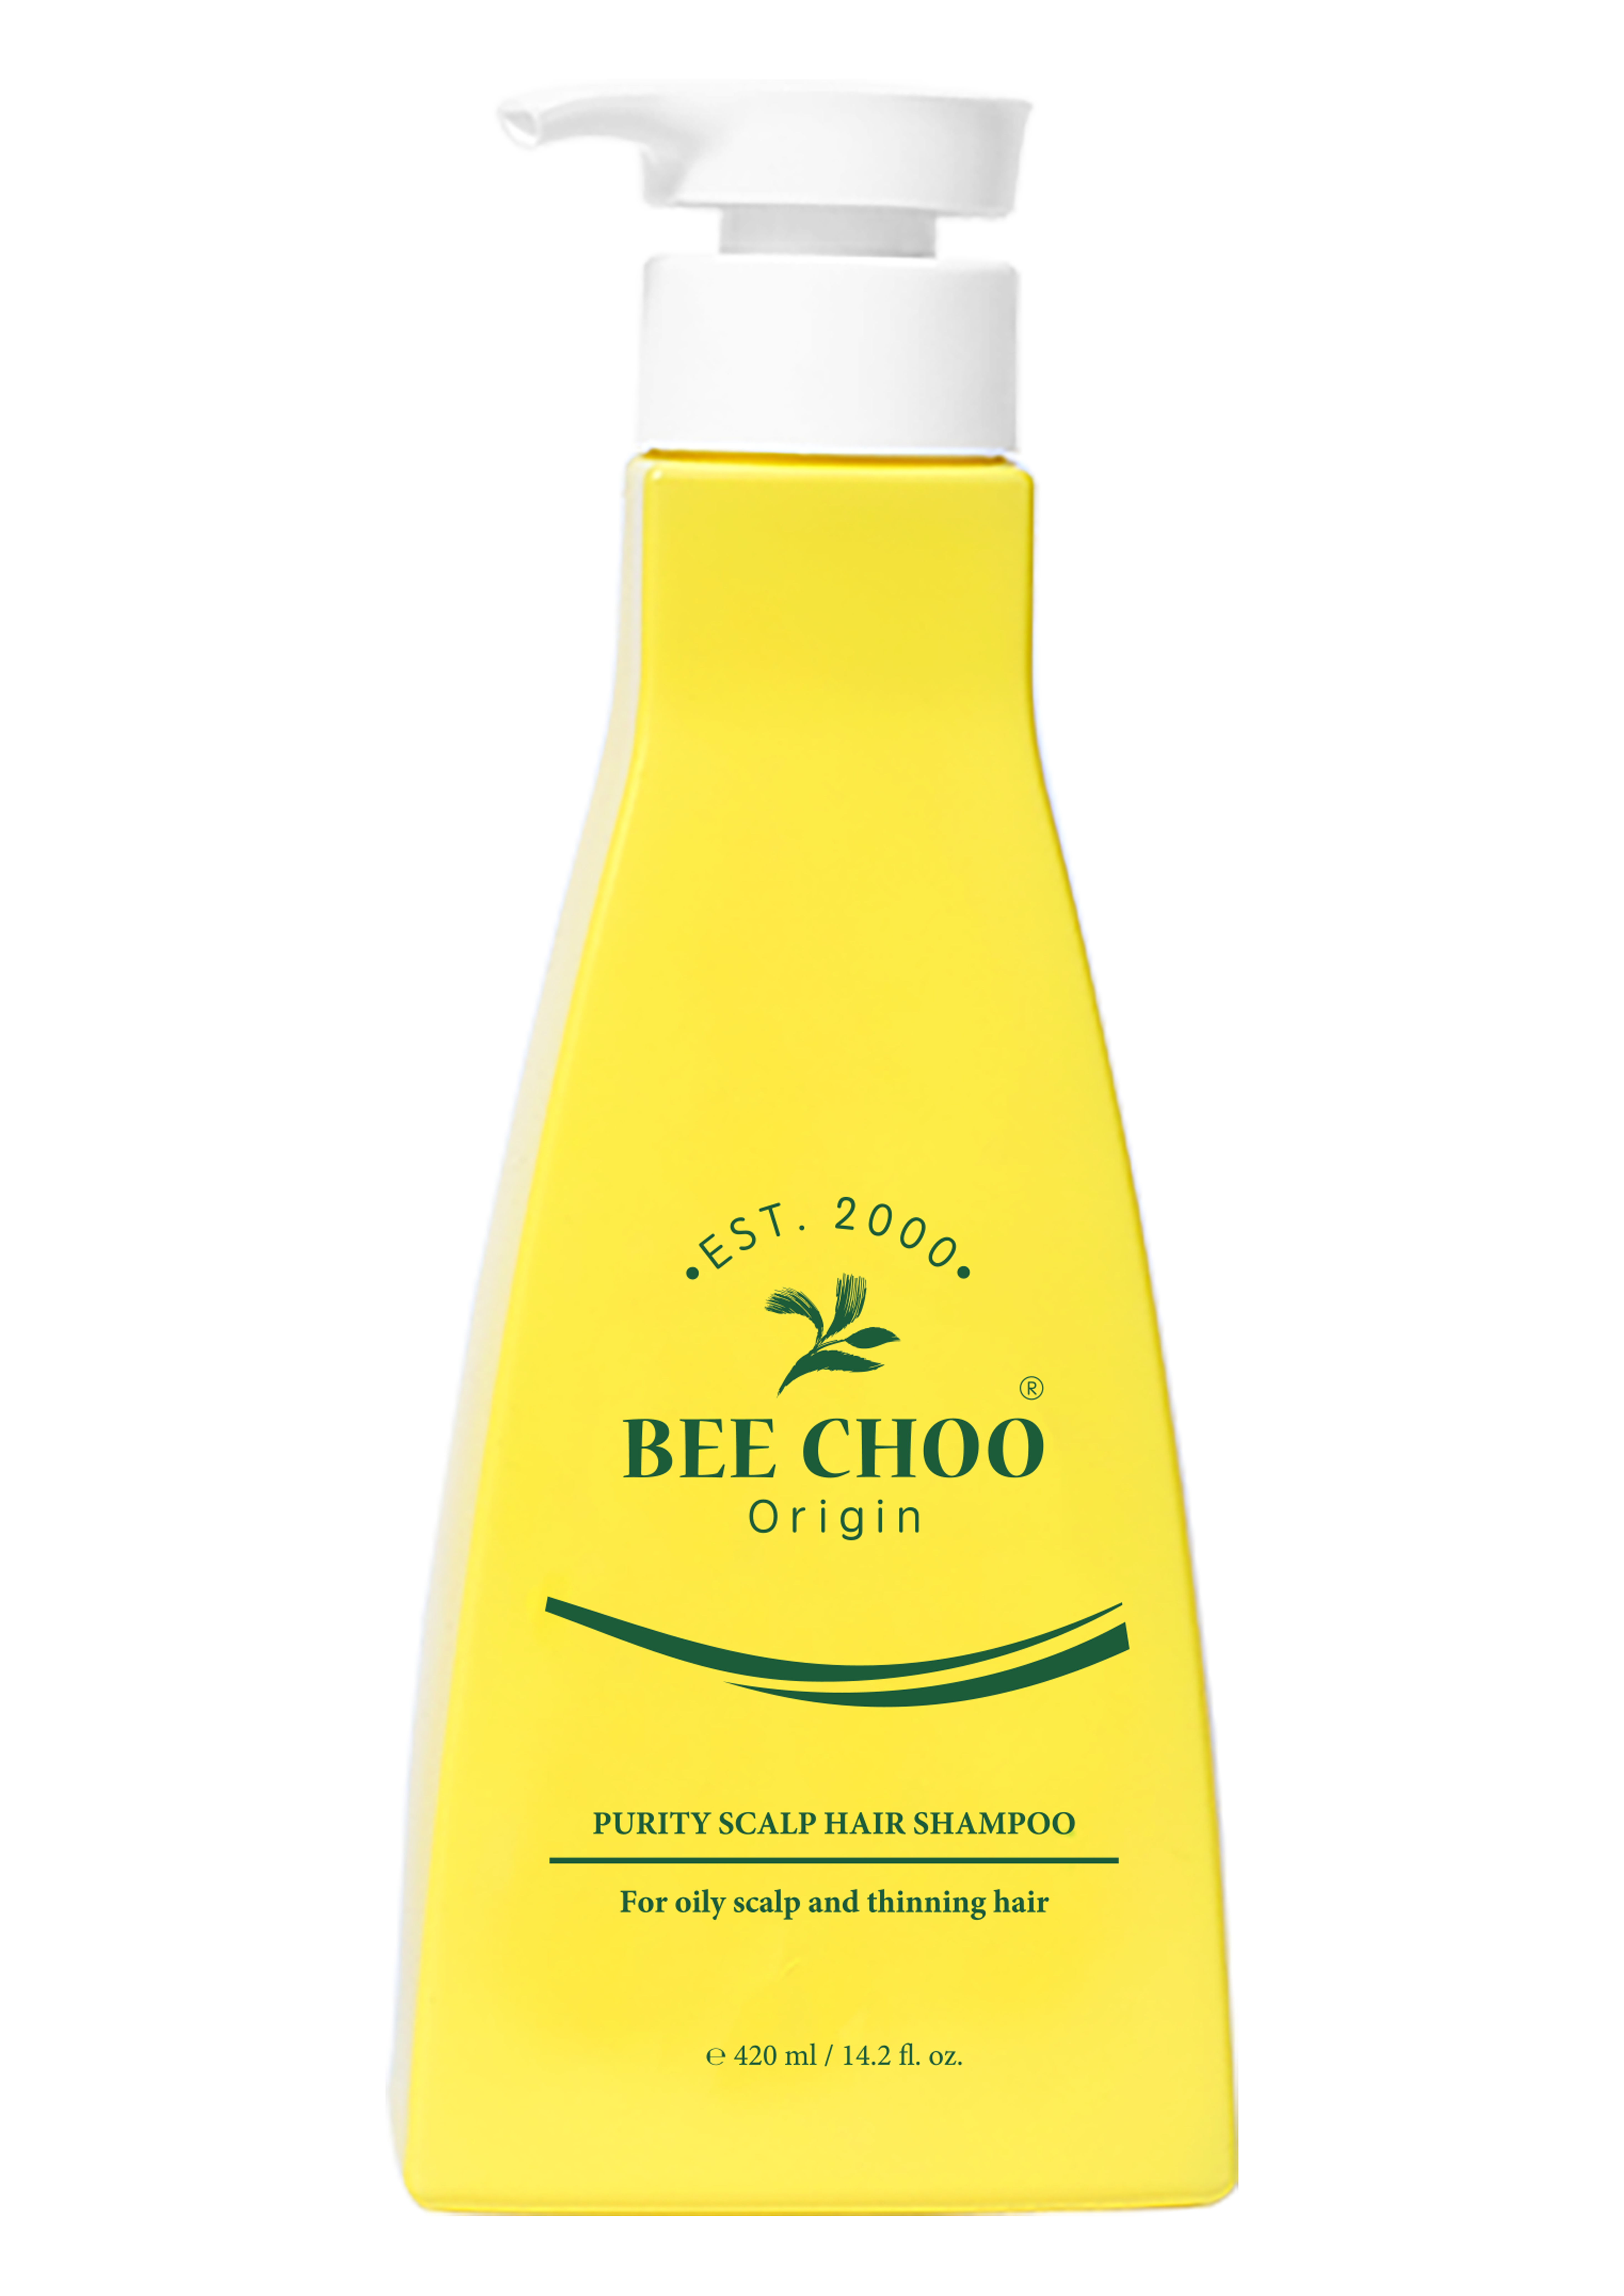 Gnaven Formen fornuft Bee Choo Hair Tonic Review & Products - Bee Choo Ladies